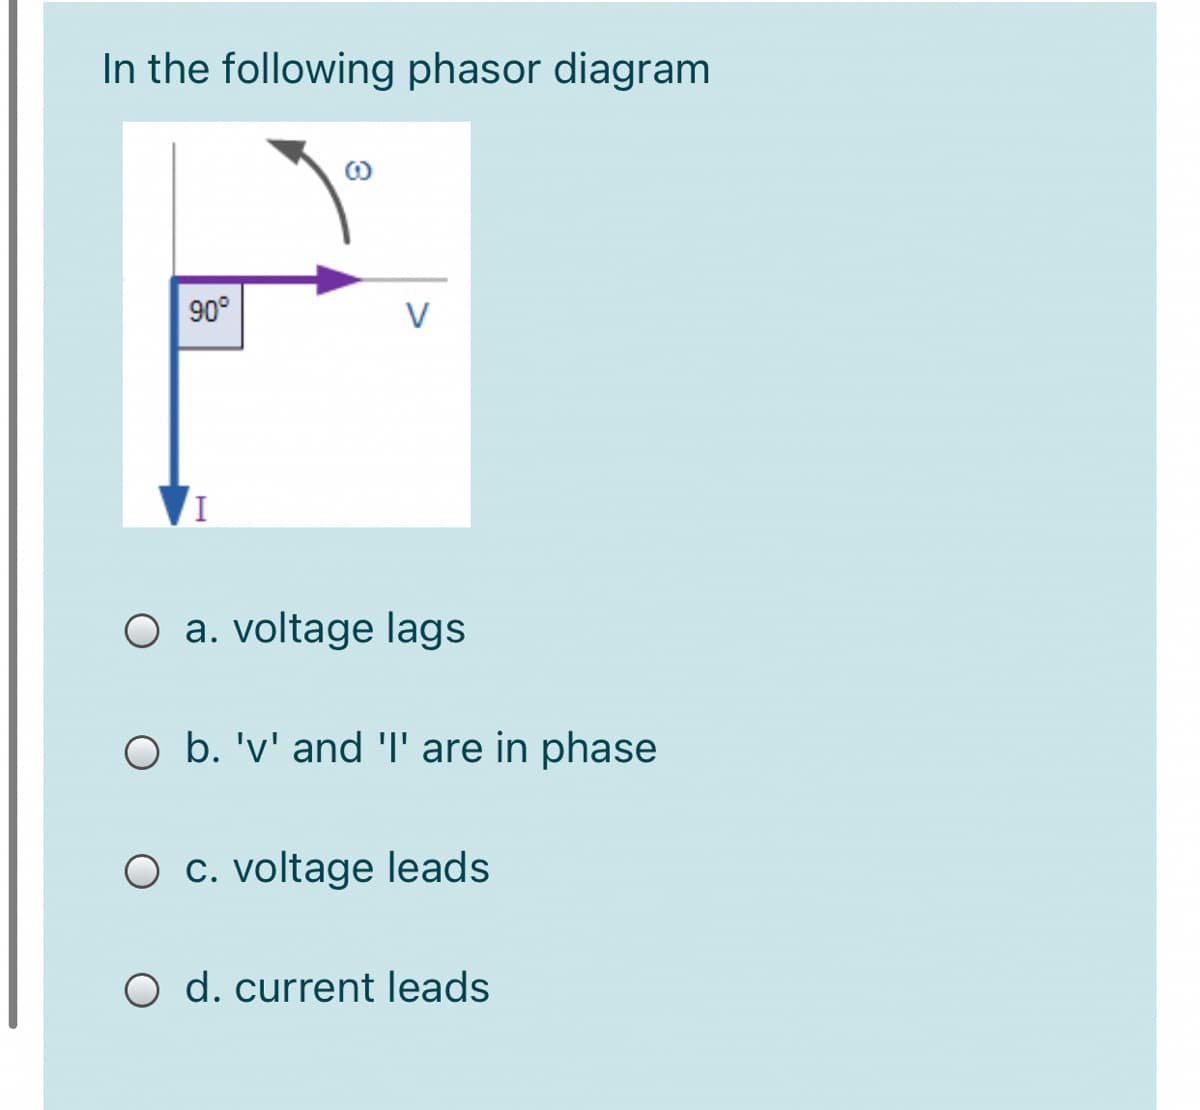 In the following phasor diagram
90°
V
O a. voltage lags
O b. 'v' and T' are in phase
O c. voltage leads
O d. current leads
